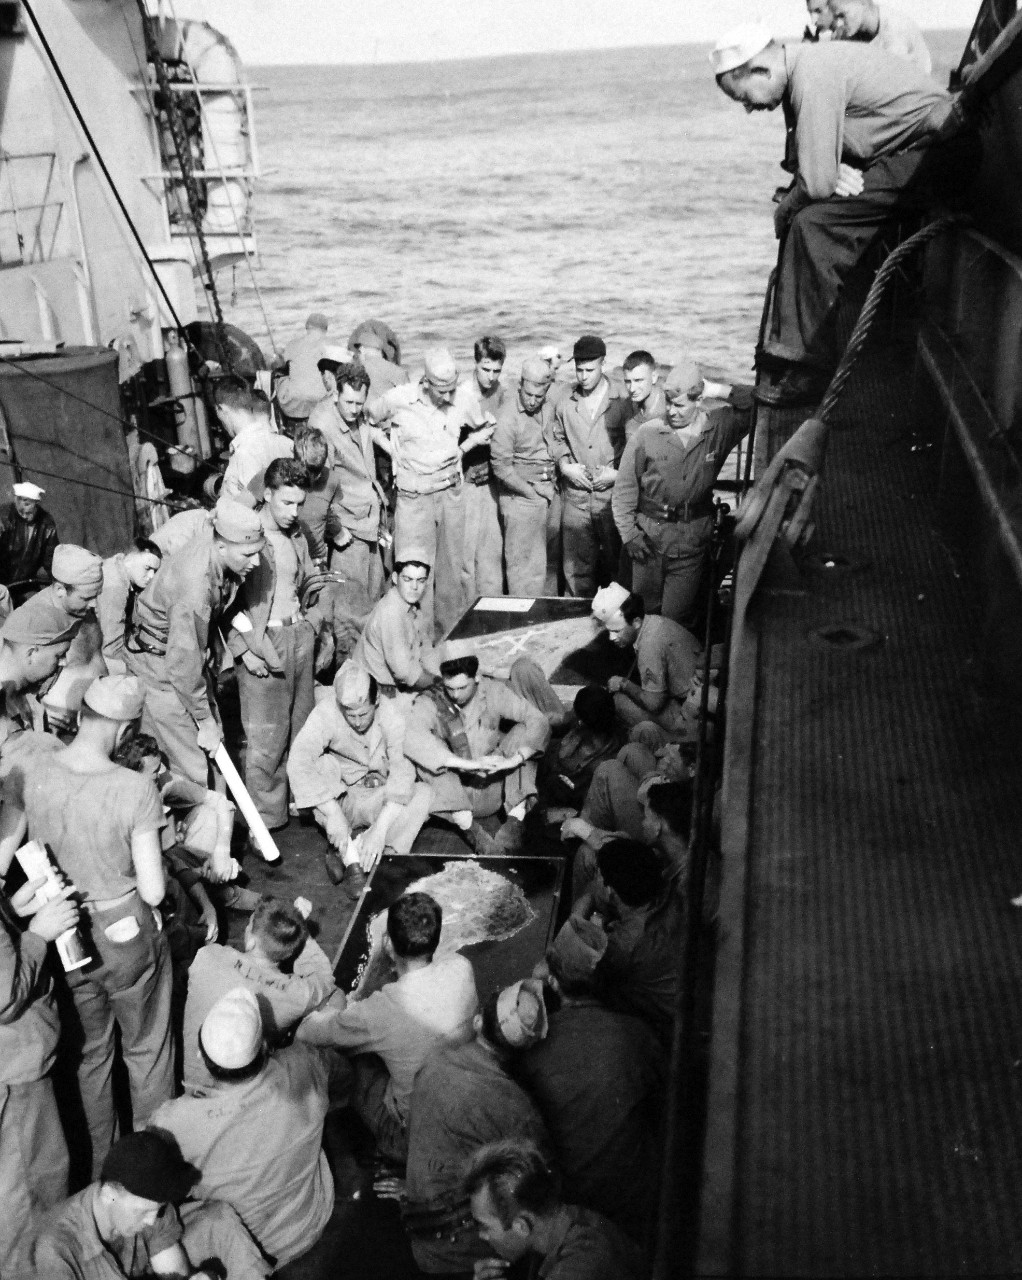 127-GW-302-109423:  Battle for Iwo Jima, February-March 1945.   A briefing class on the target of the troops is held by Captain K. Chandler on board ships, the men were told what their target was as soon as they sailed.    Photographed by Dodds onboard USS Cecil (APA-96), February 2, 1945.  Official U.S. Marine Corps photograph, now in the collections of the National Archives.  (2016/02/17).